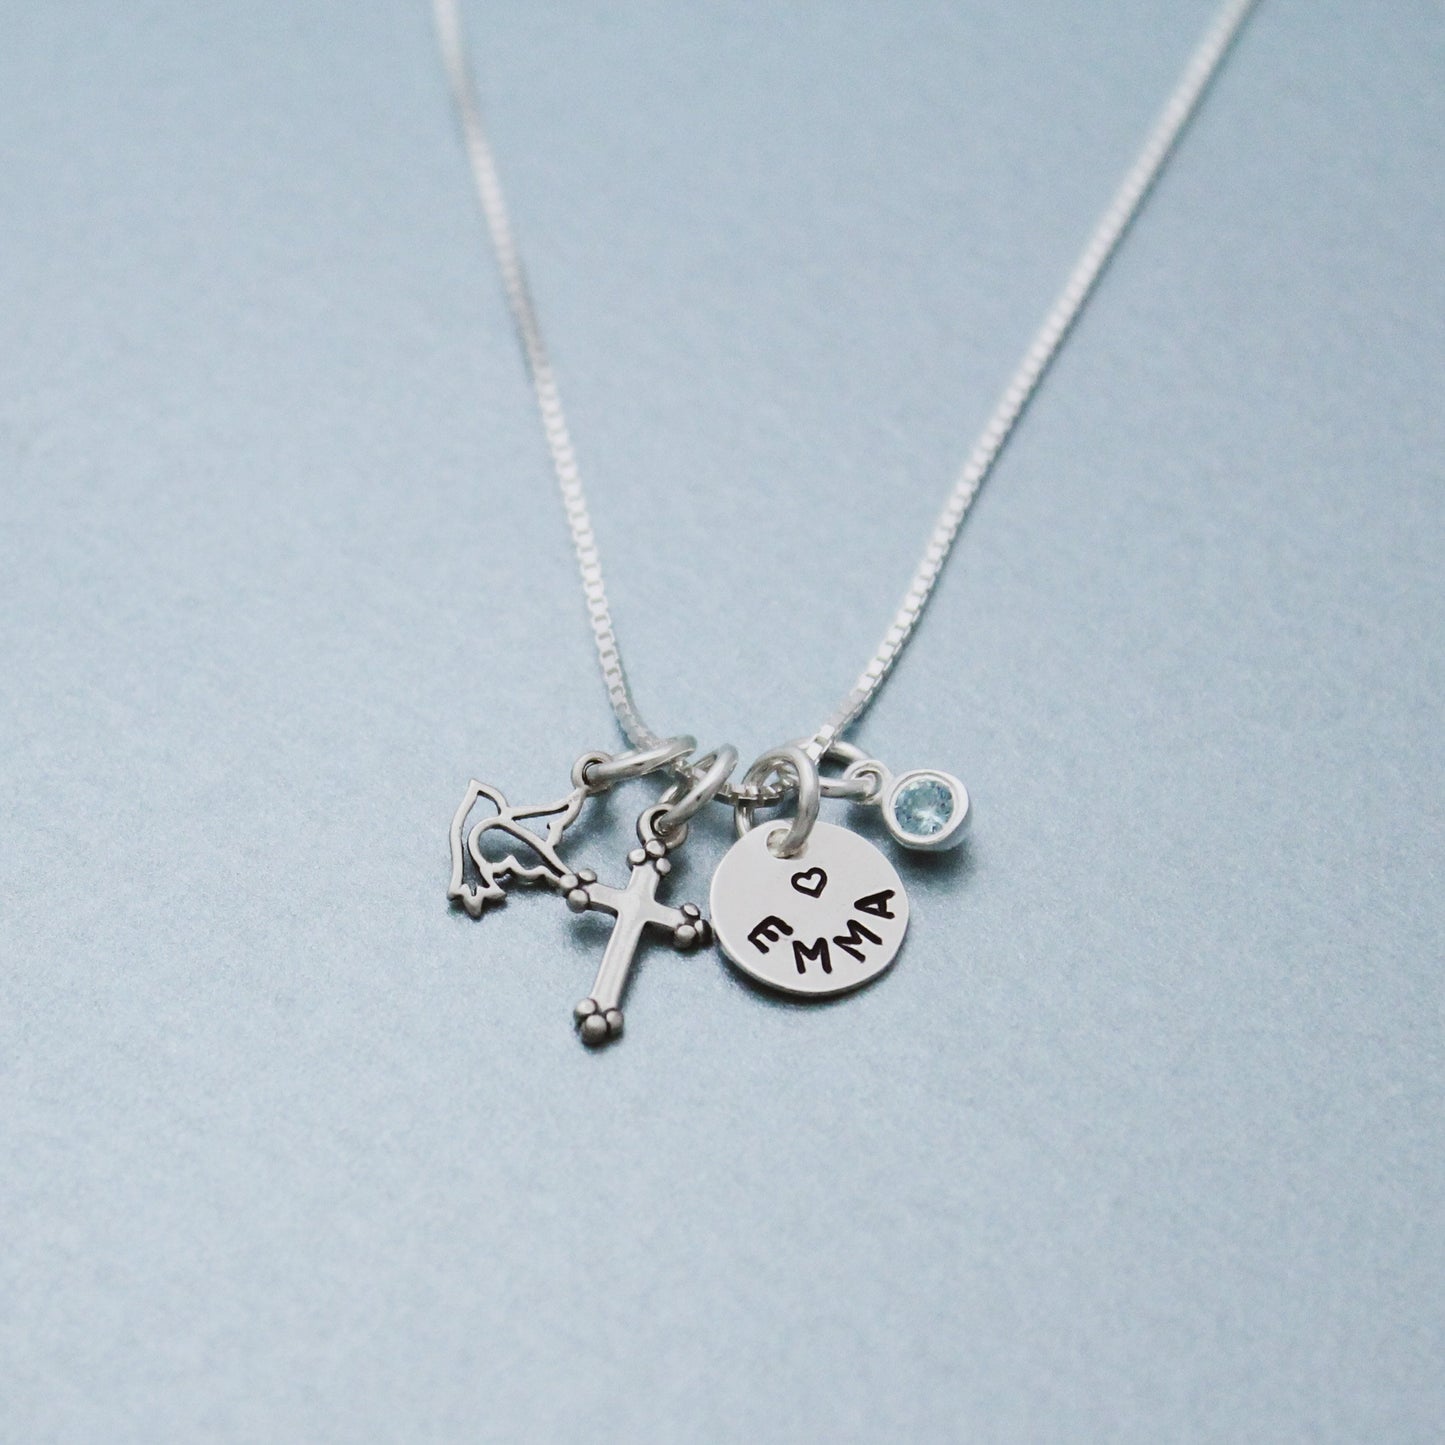 Tiny Personalized Cross Charm Necklace in Sterling Silver, Confirmation Cross Necklace, First Communion Cross Necklace, Hand Stamped Jewelry